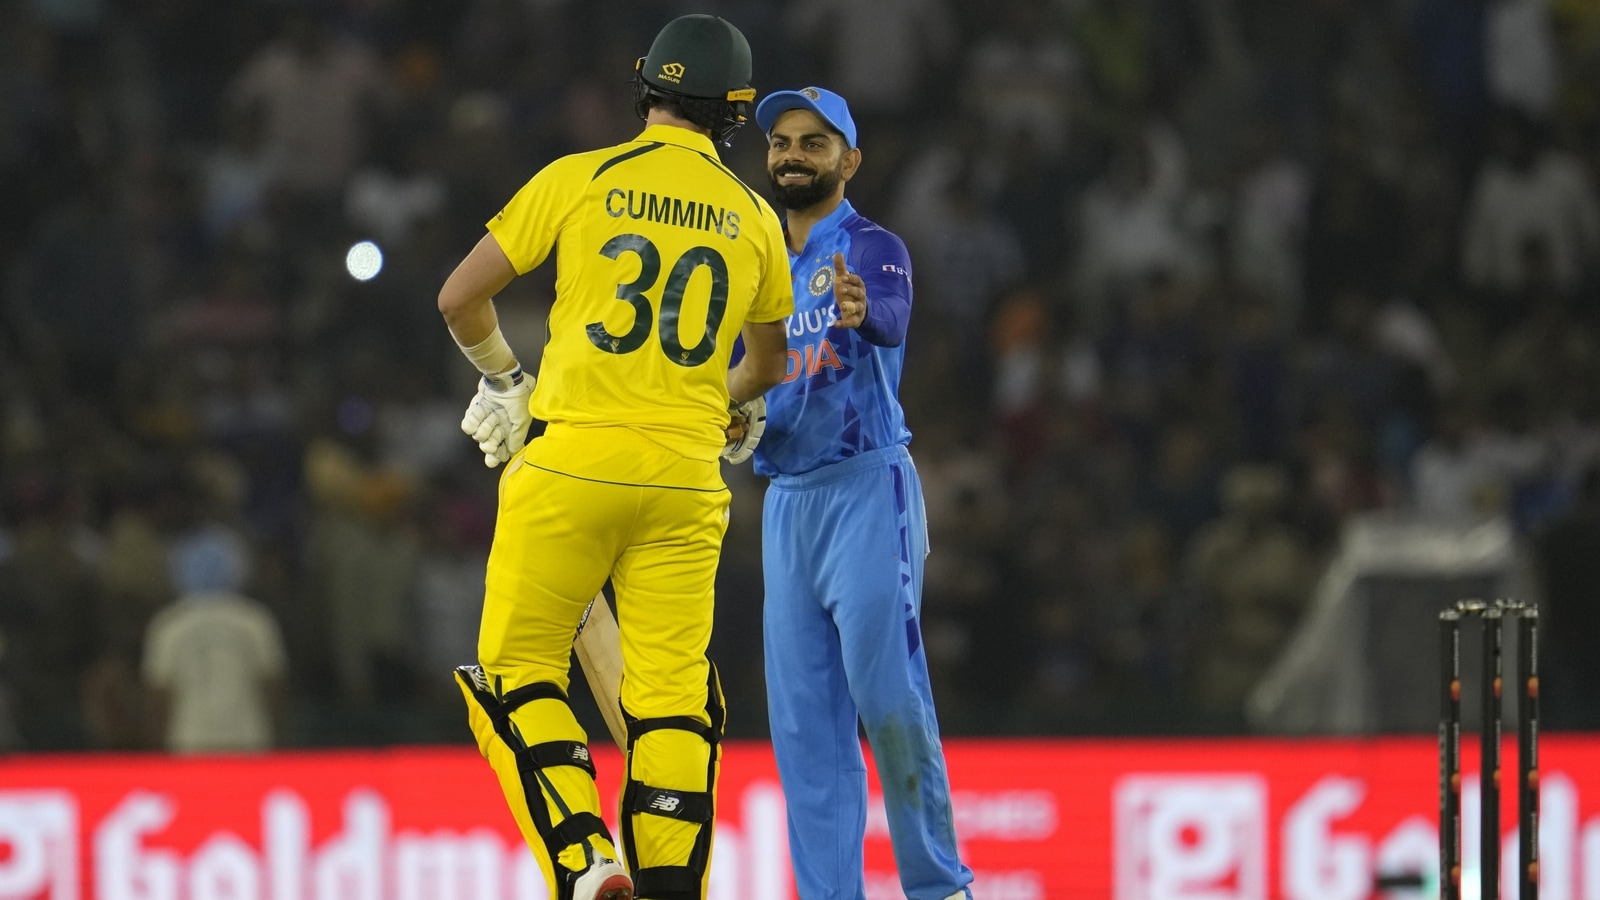 India vs Australia 1st T20I Action in images Hindustan Times